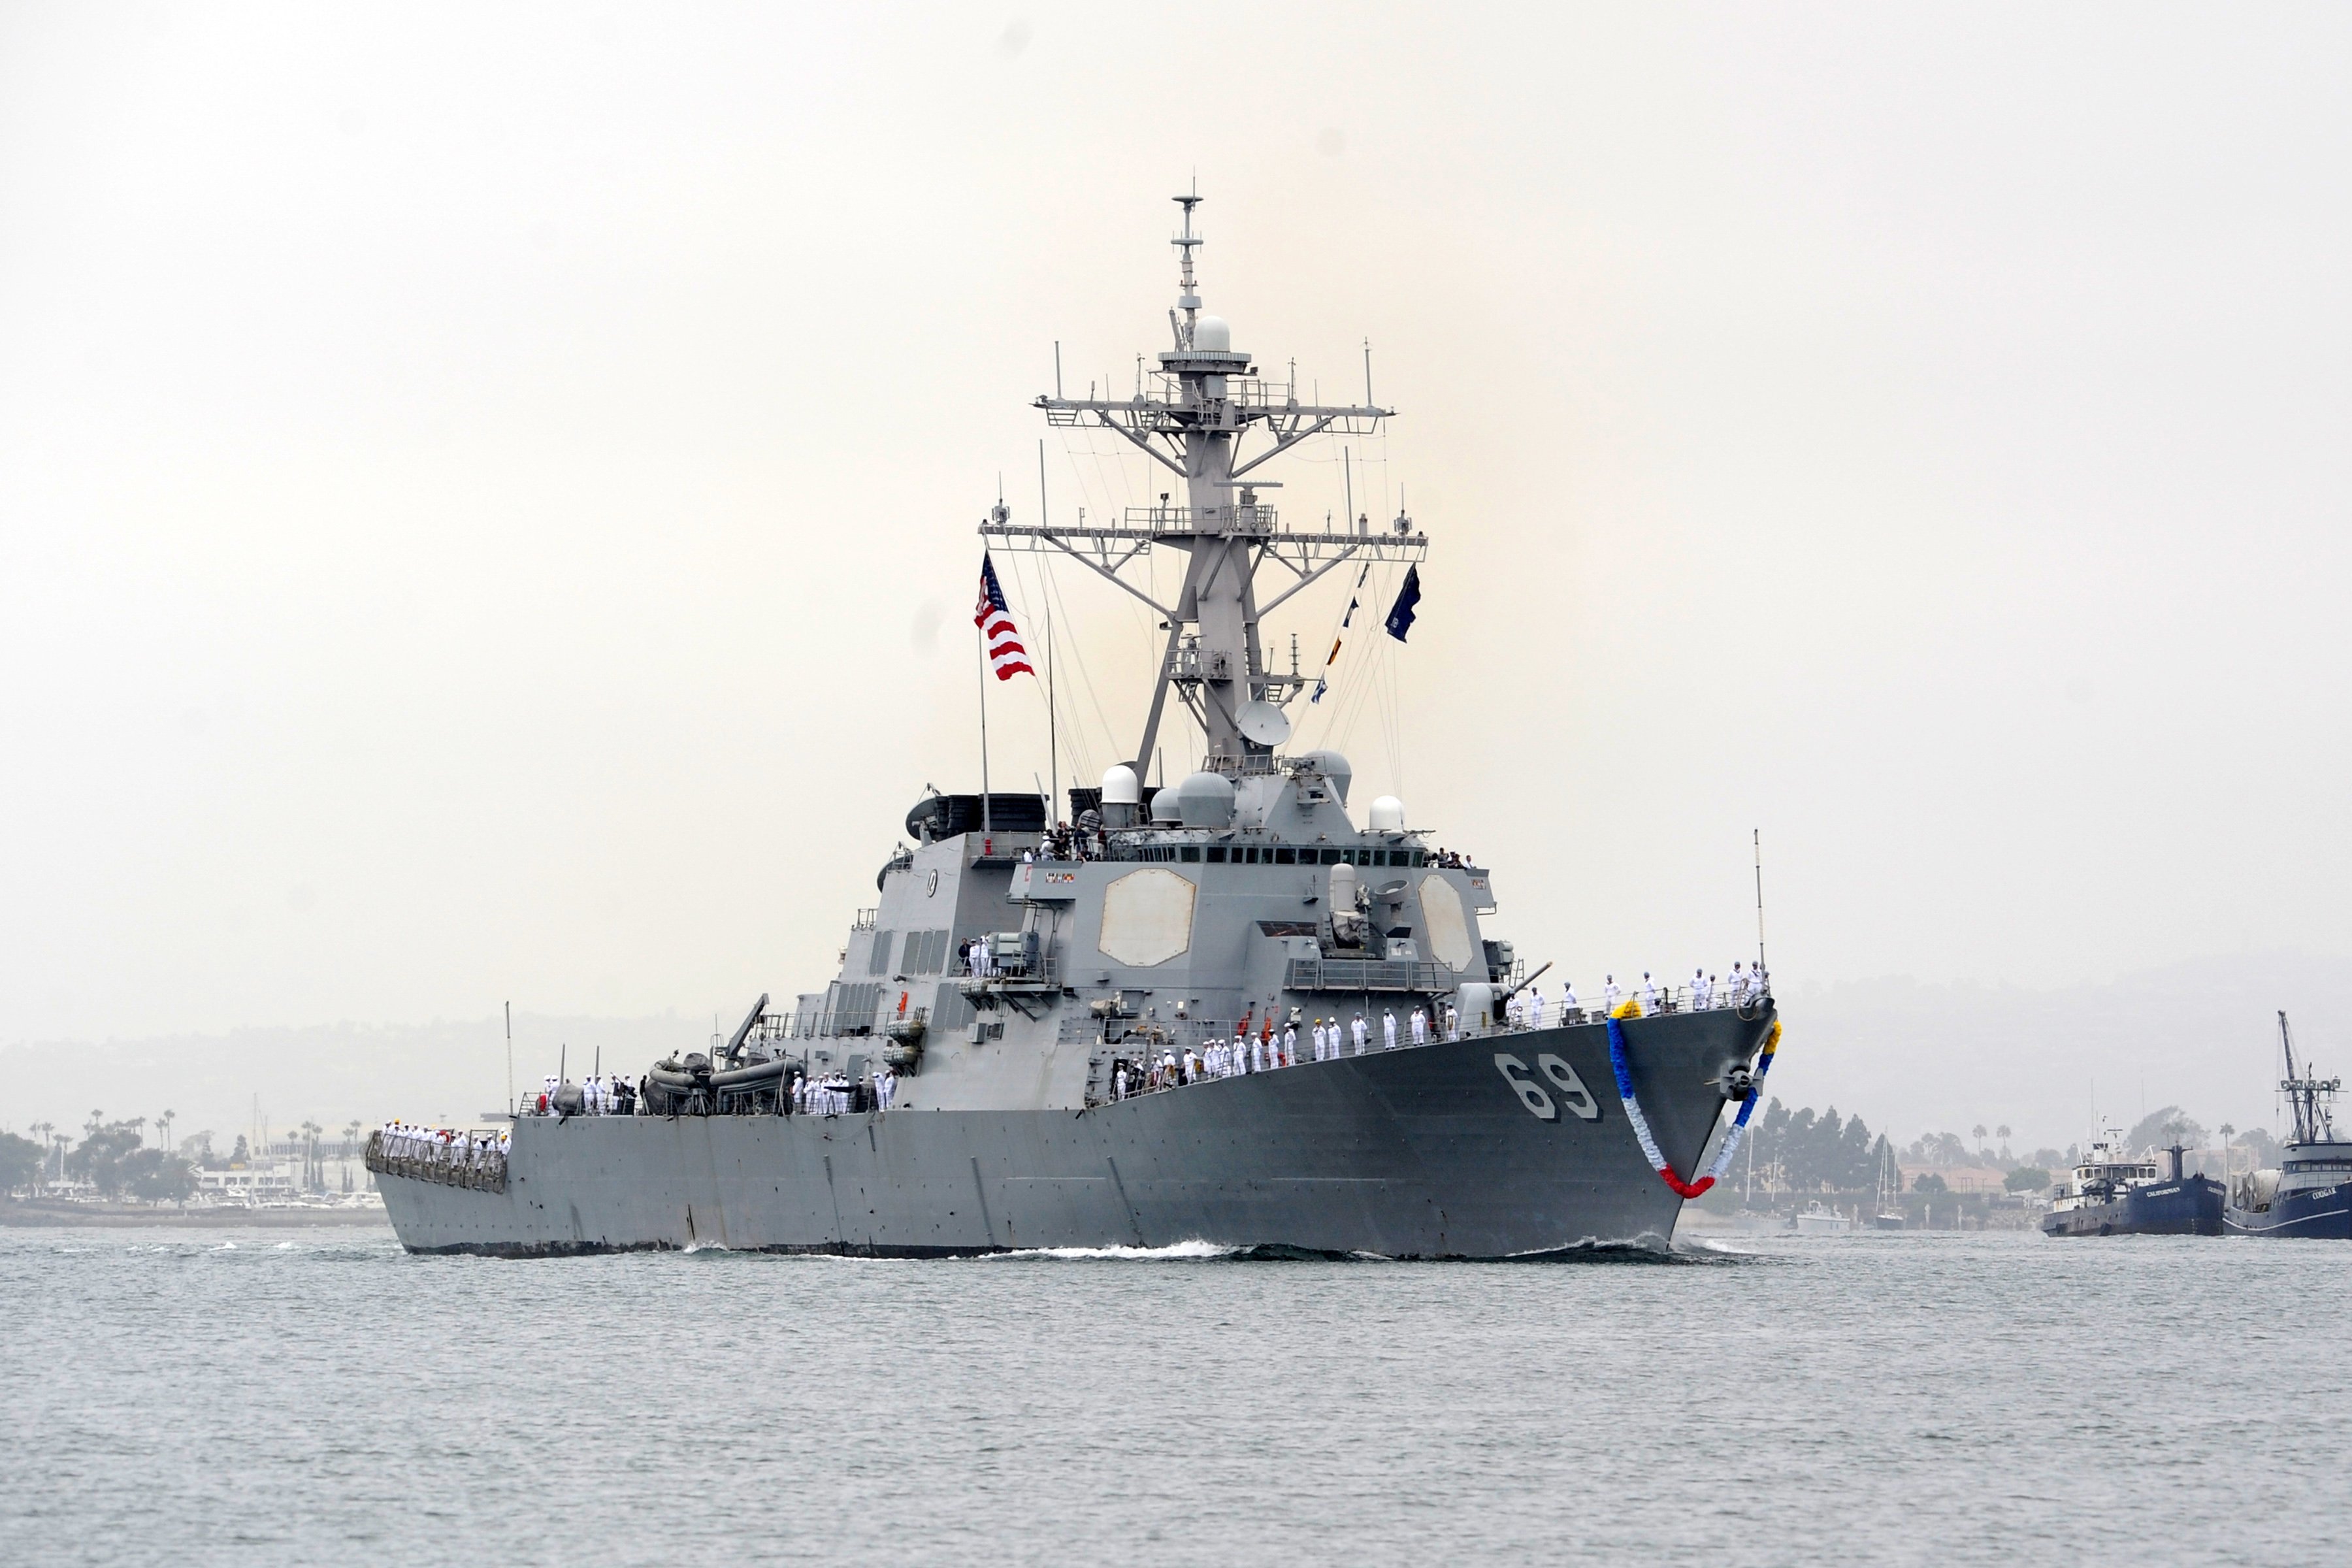 USS Milius (DDG-69) returns to homeport Naval Base San Diego after an eight-month independent deployment to the western Pacific and U.S. Central Command areas of responsibility in 2012. US Navy Photo